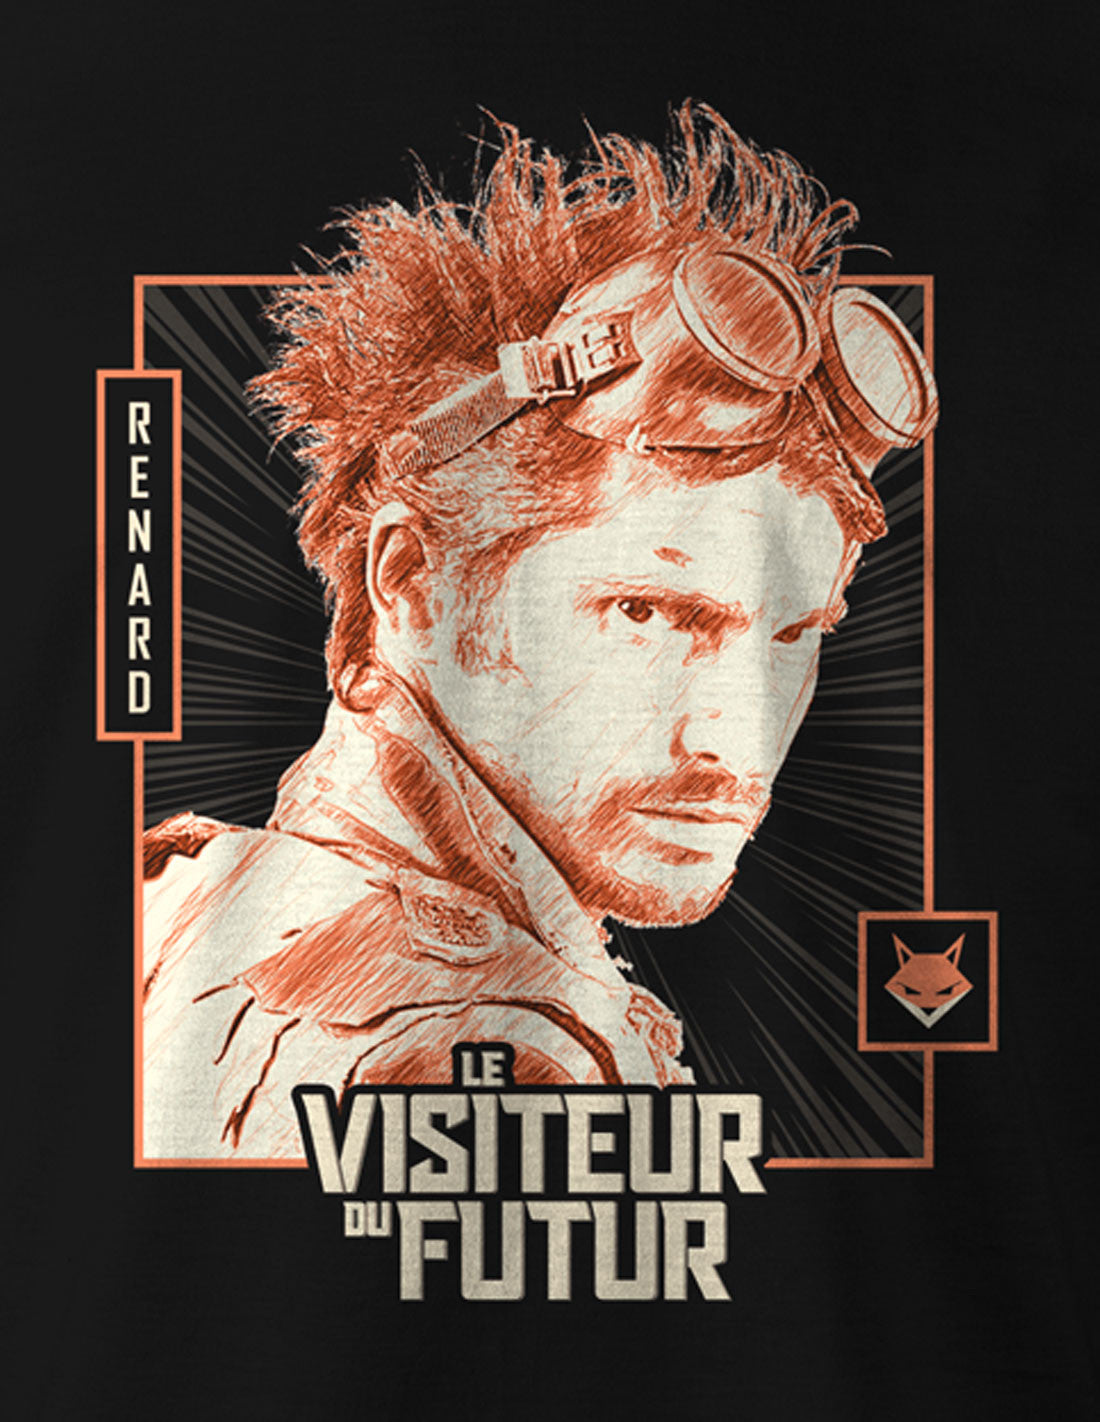 The Visitor from the Future T-shirt - Fox